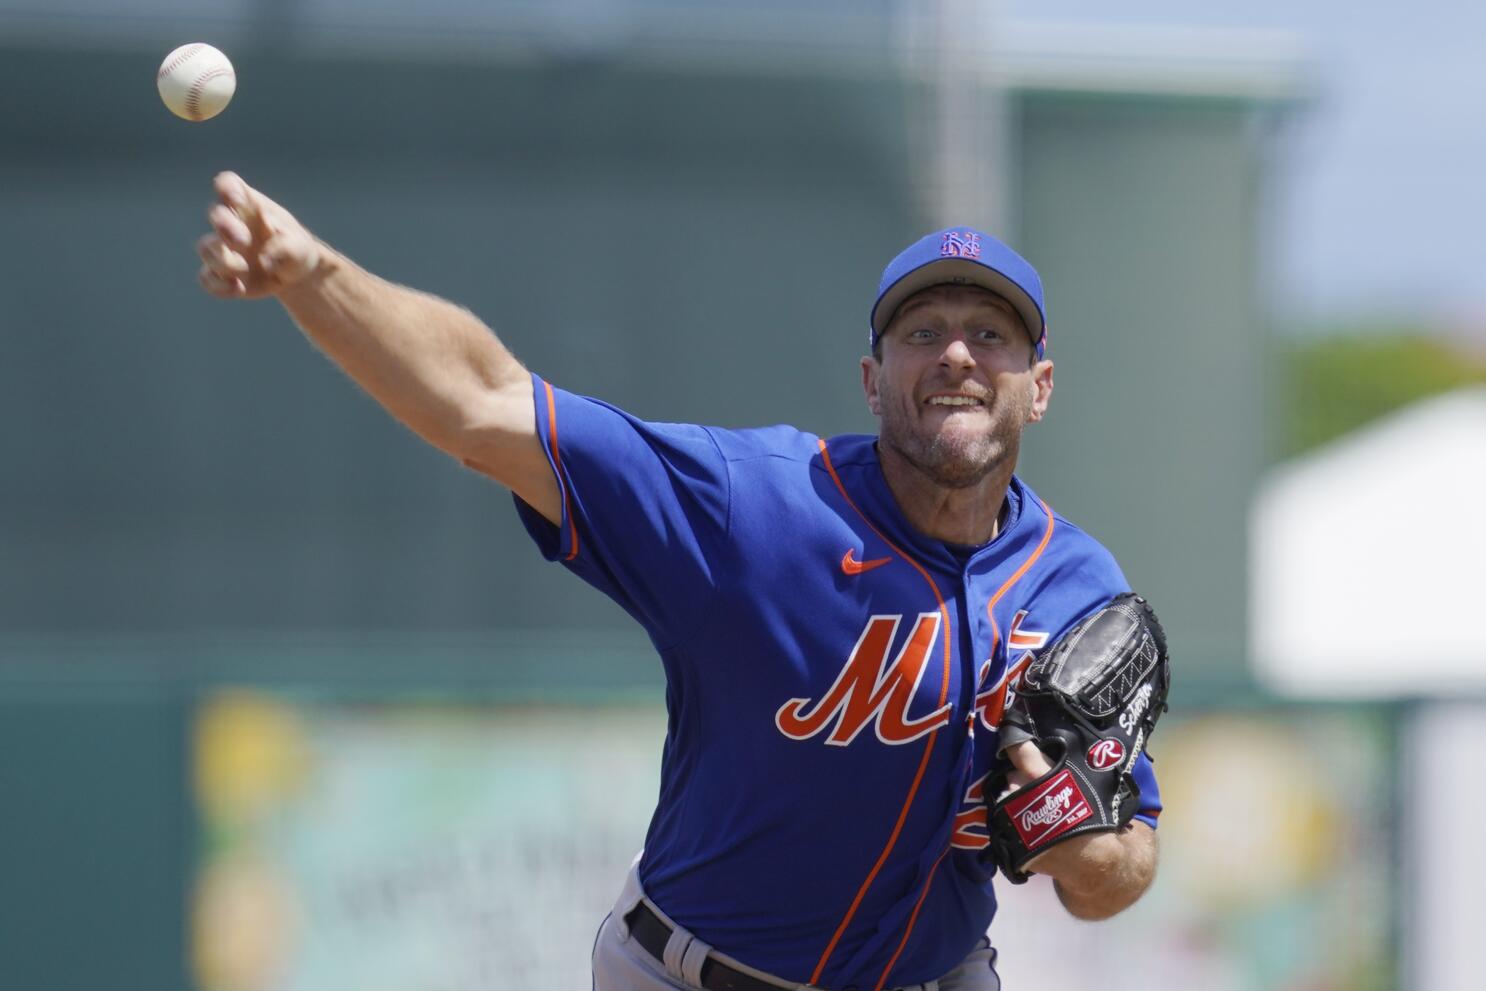 Aces up: Mets make money pitch with Scherzer-deGrom duo - The San Diego  Union-Tribune